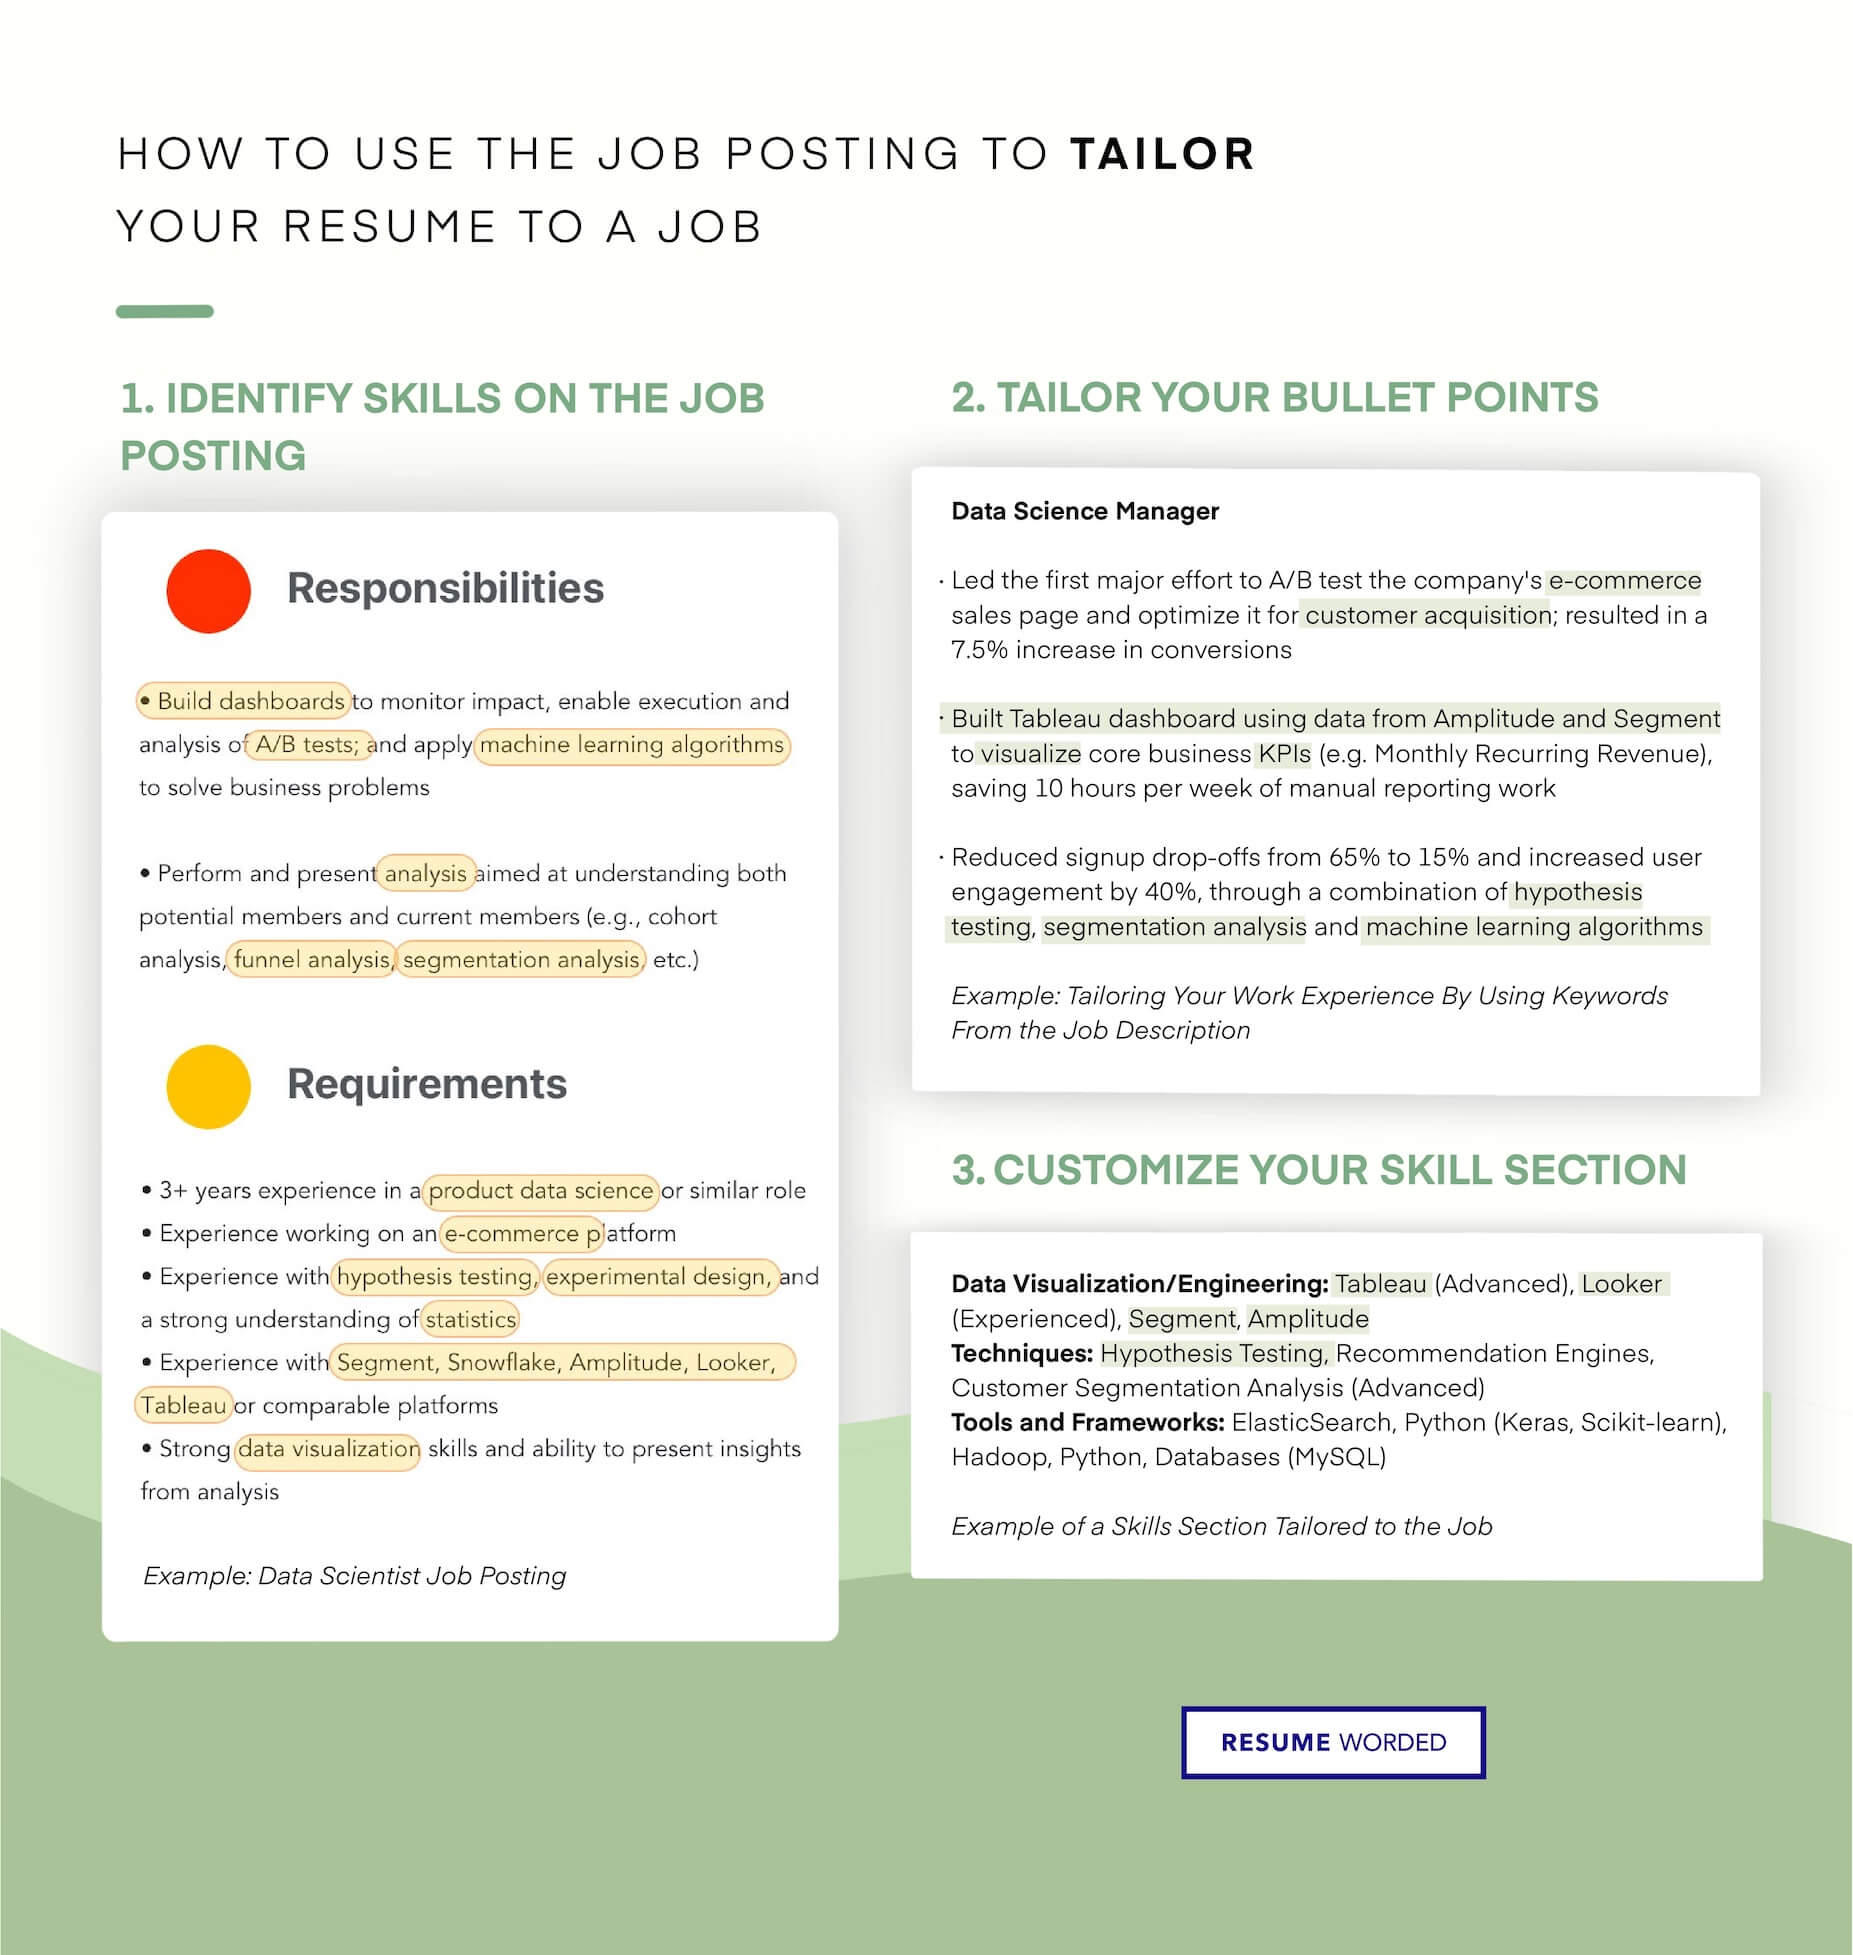 Tailor your resume to your specialization. - Biomedical Engineer Resume